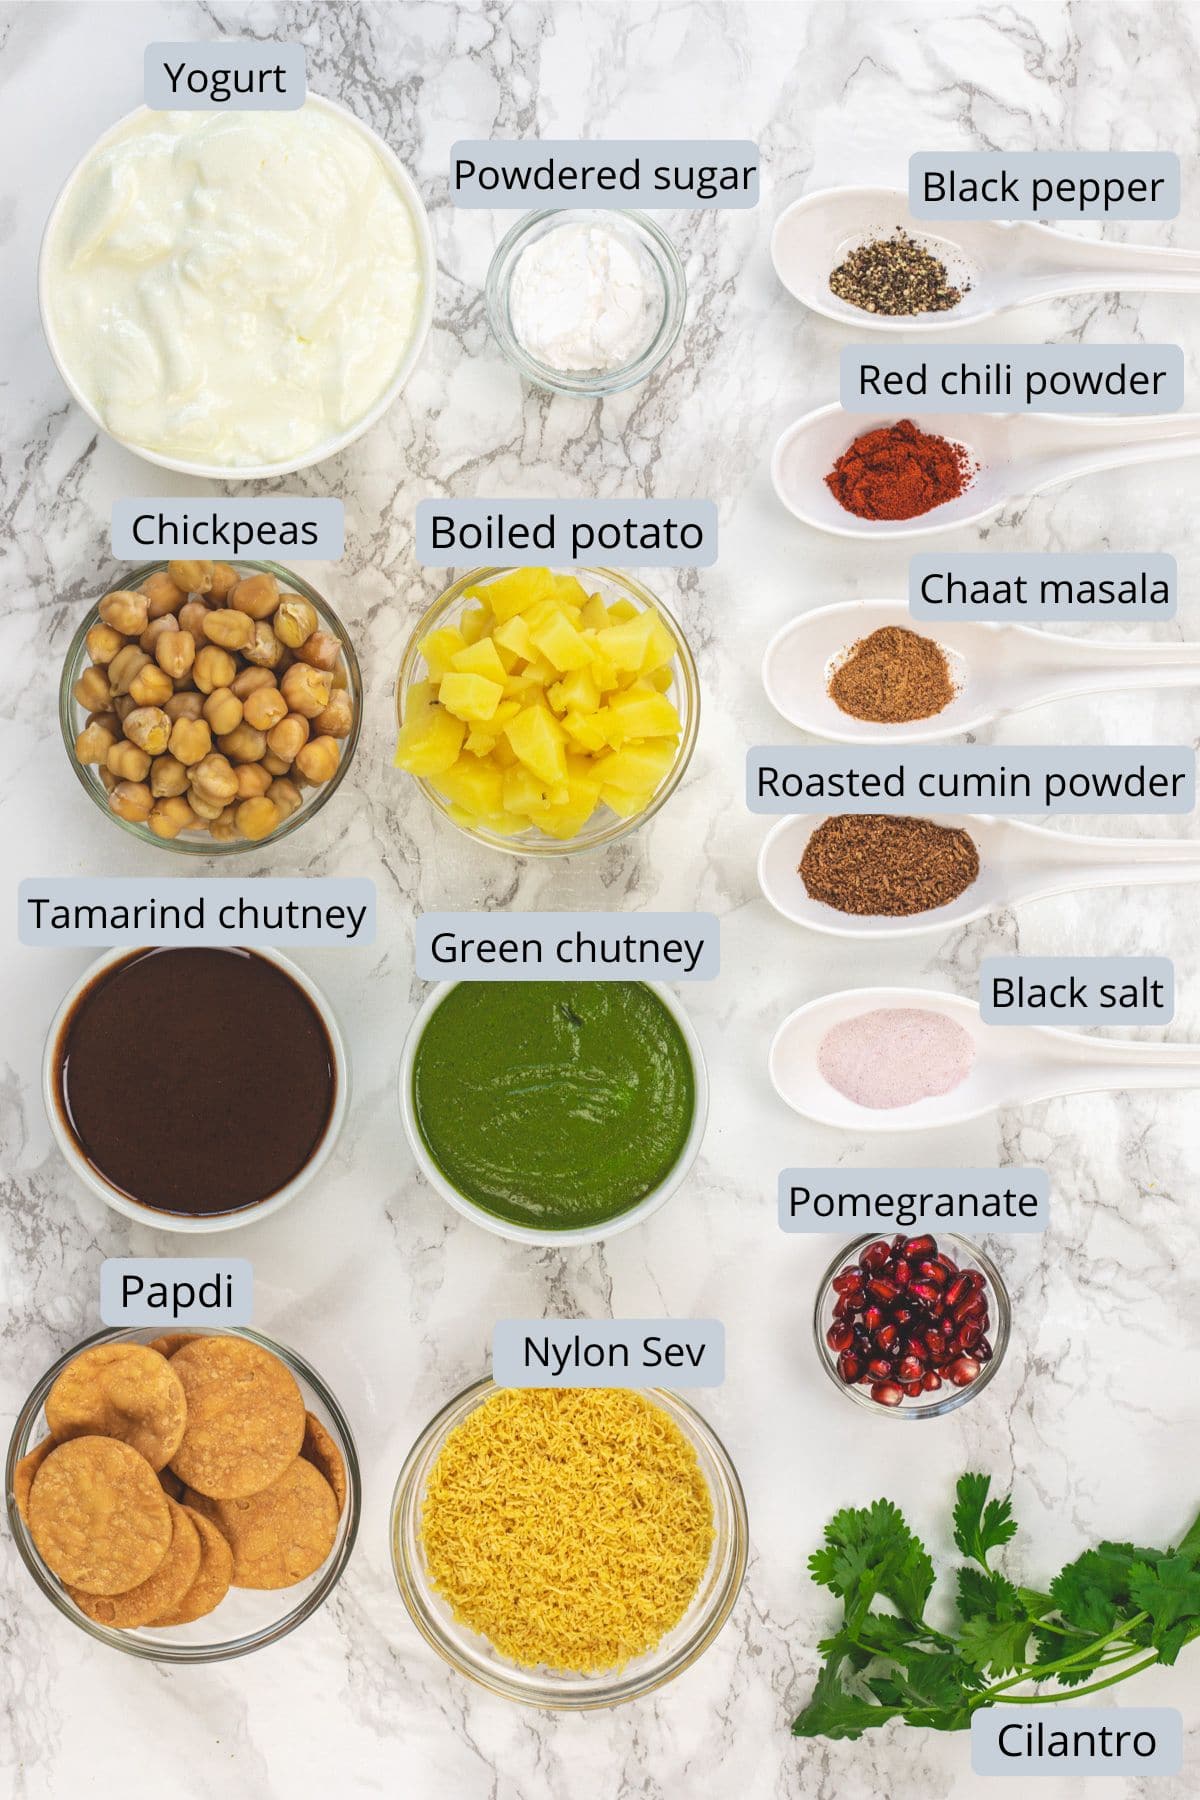 Papdi chaat recipe ingredients in bowls and spoons with labels.